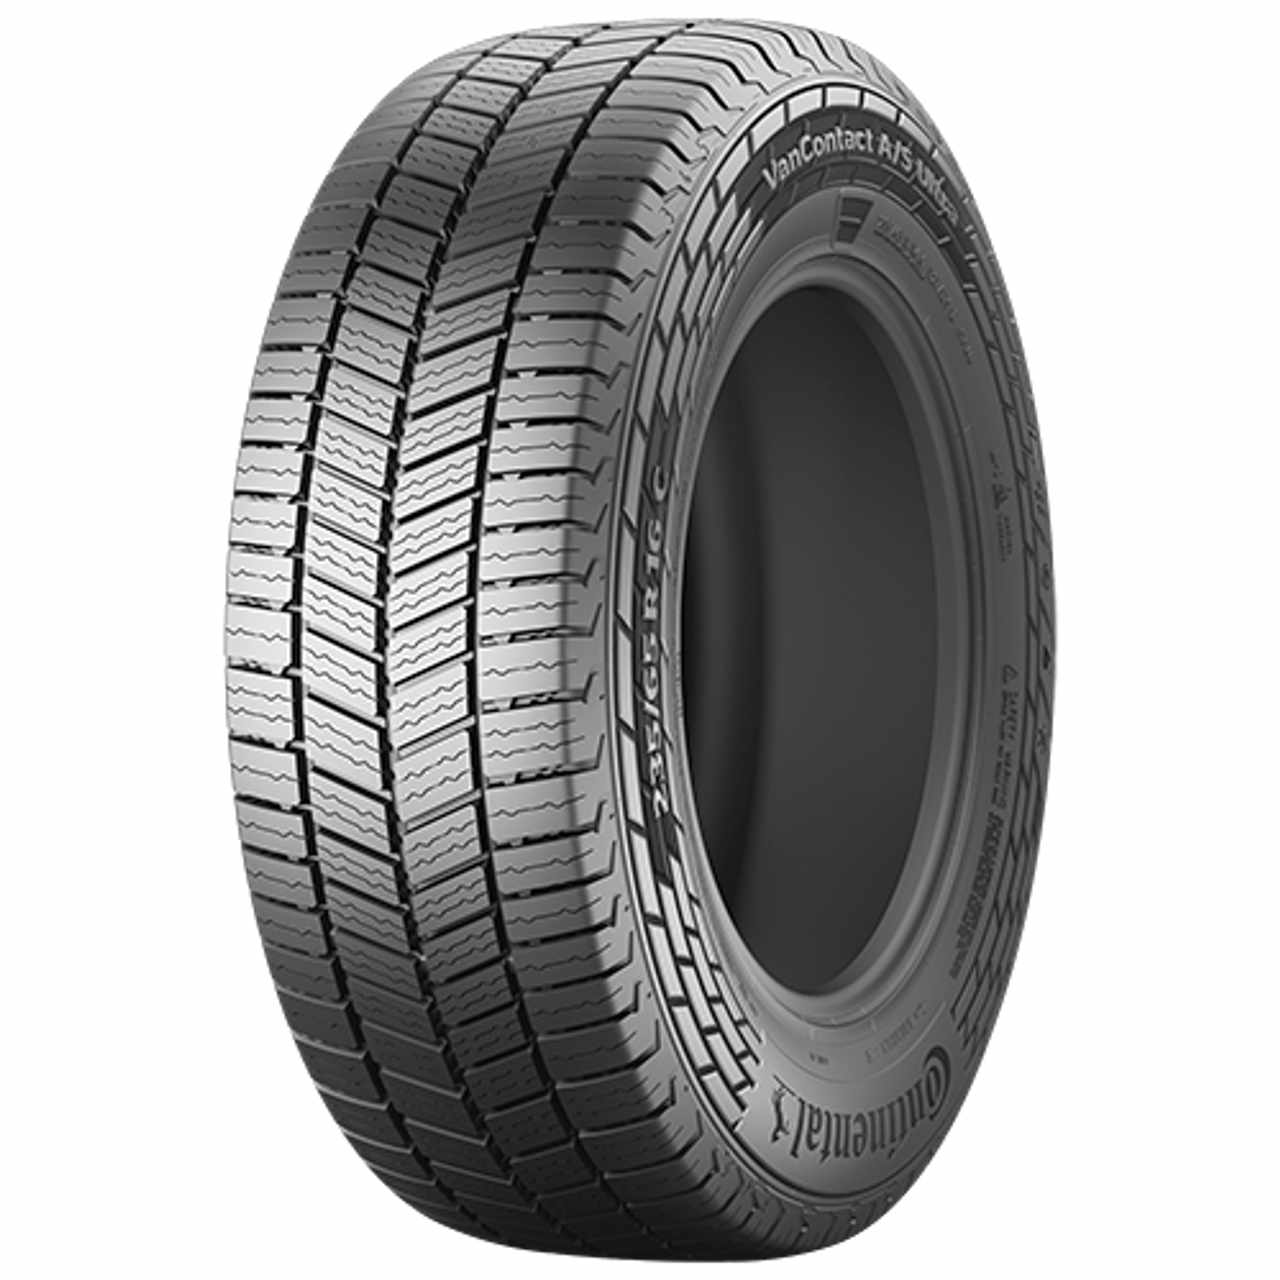 CONTINENTAL VANCONTACT A/S ULTRA 205/70R17C 115R BSW